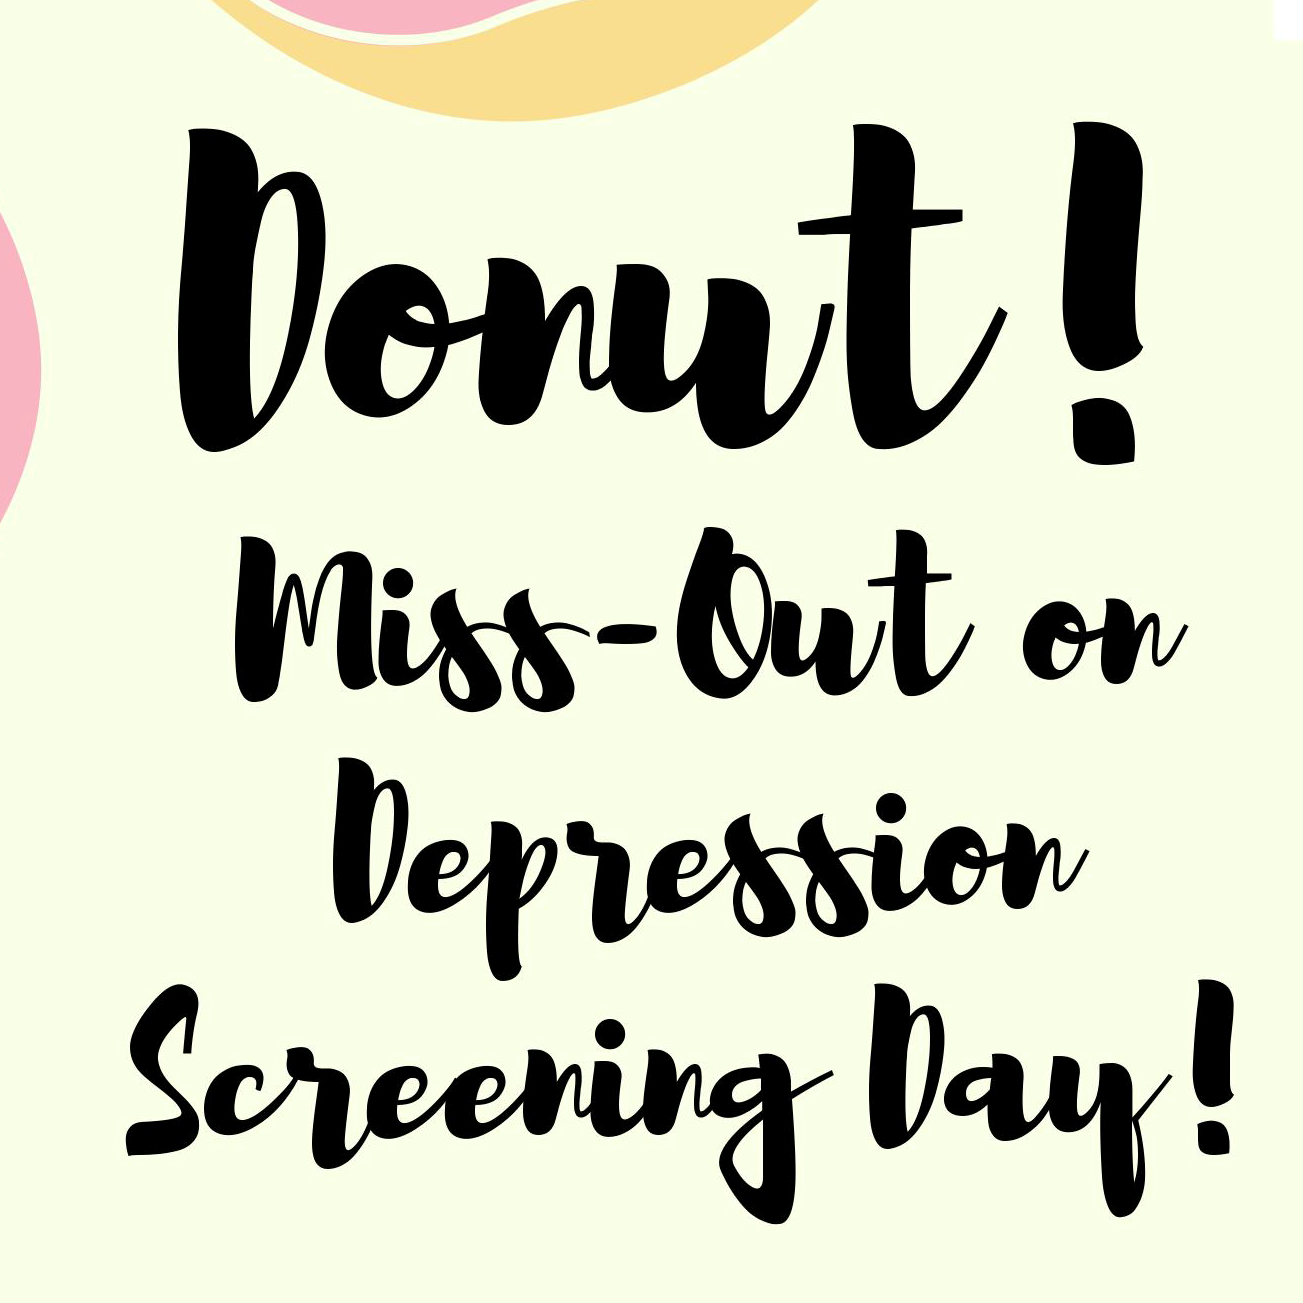 event Do Not Miss Out on Depression Screening Day